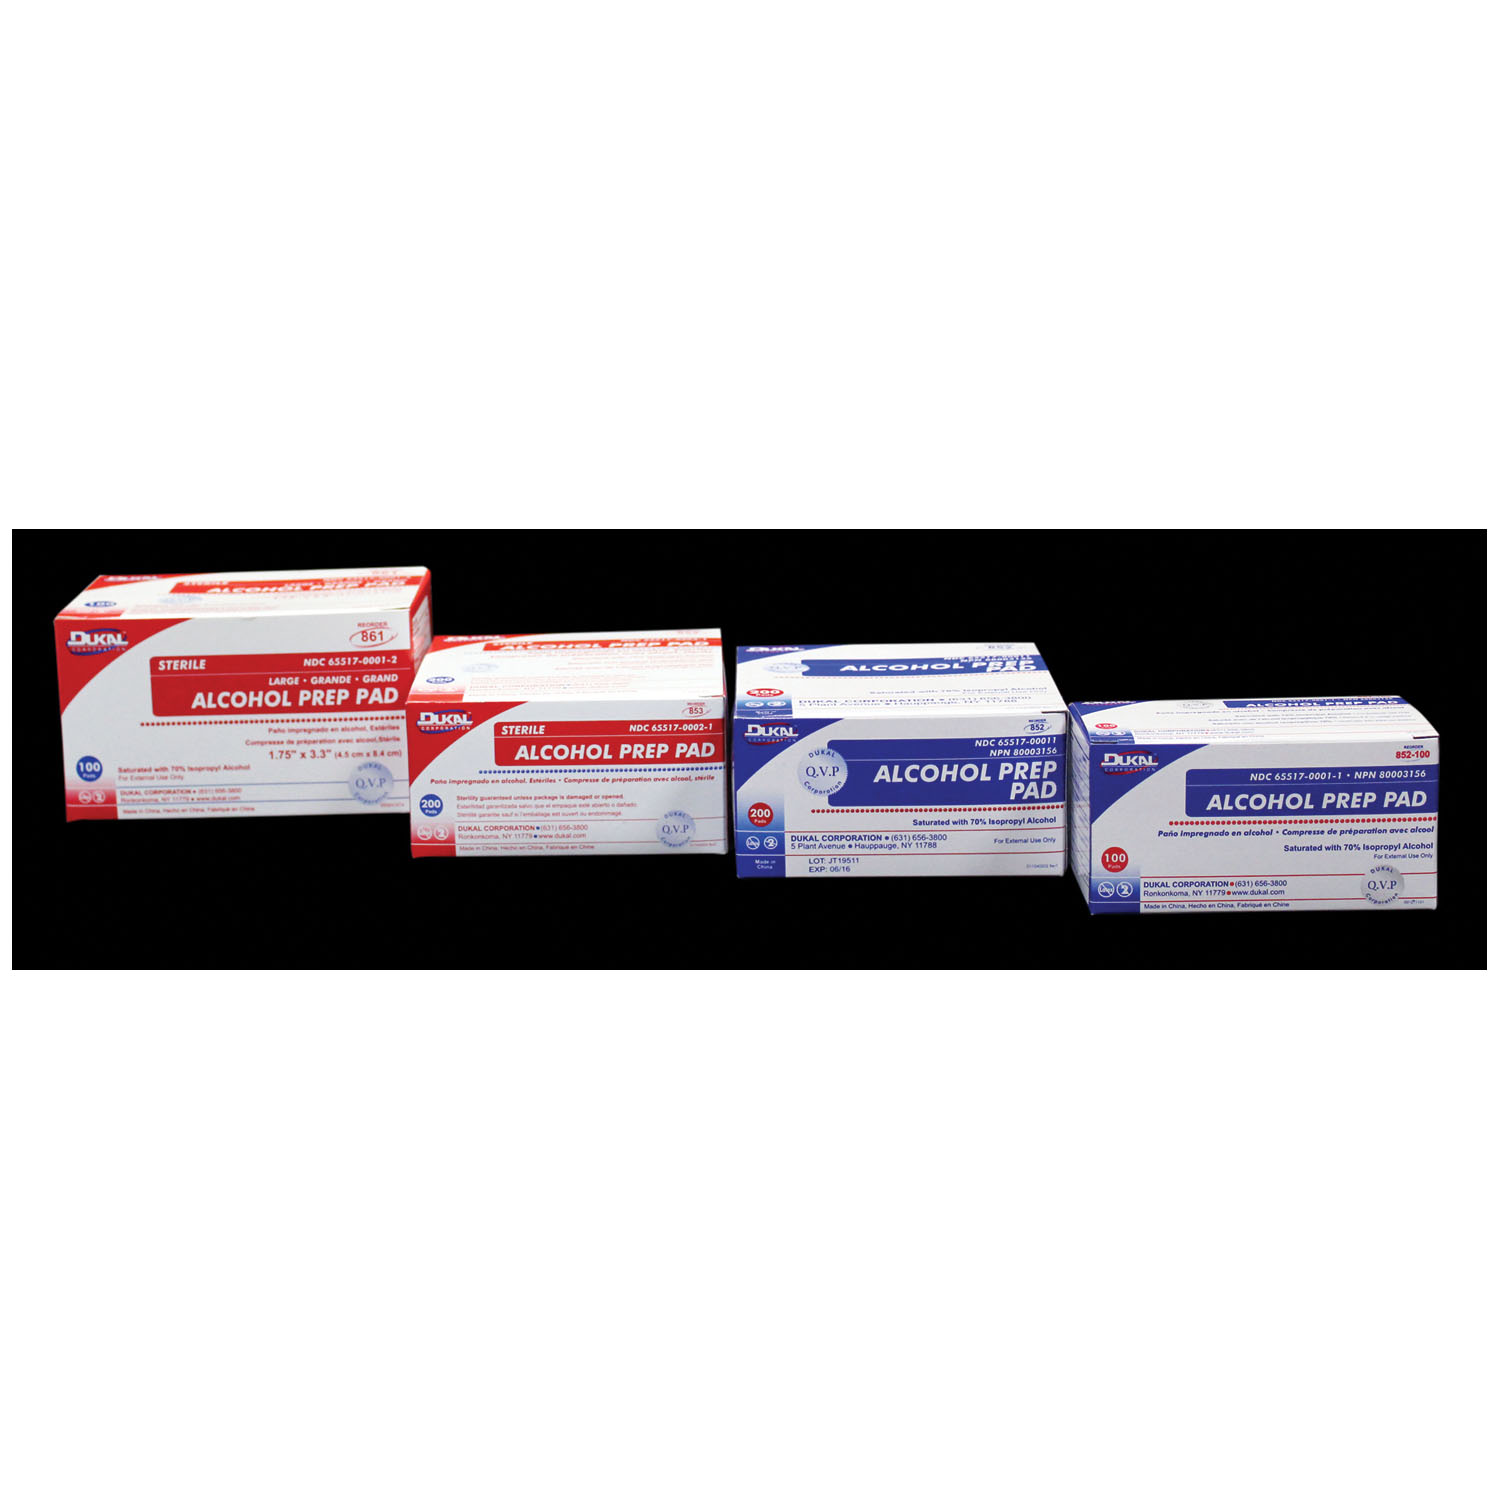 DUKAL ALCOHOL PADS : 853 BX $2.91 Stocked